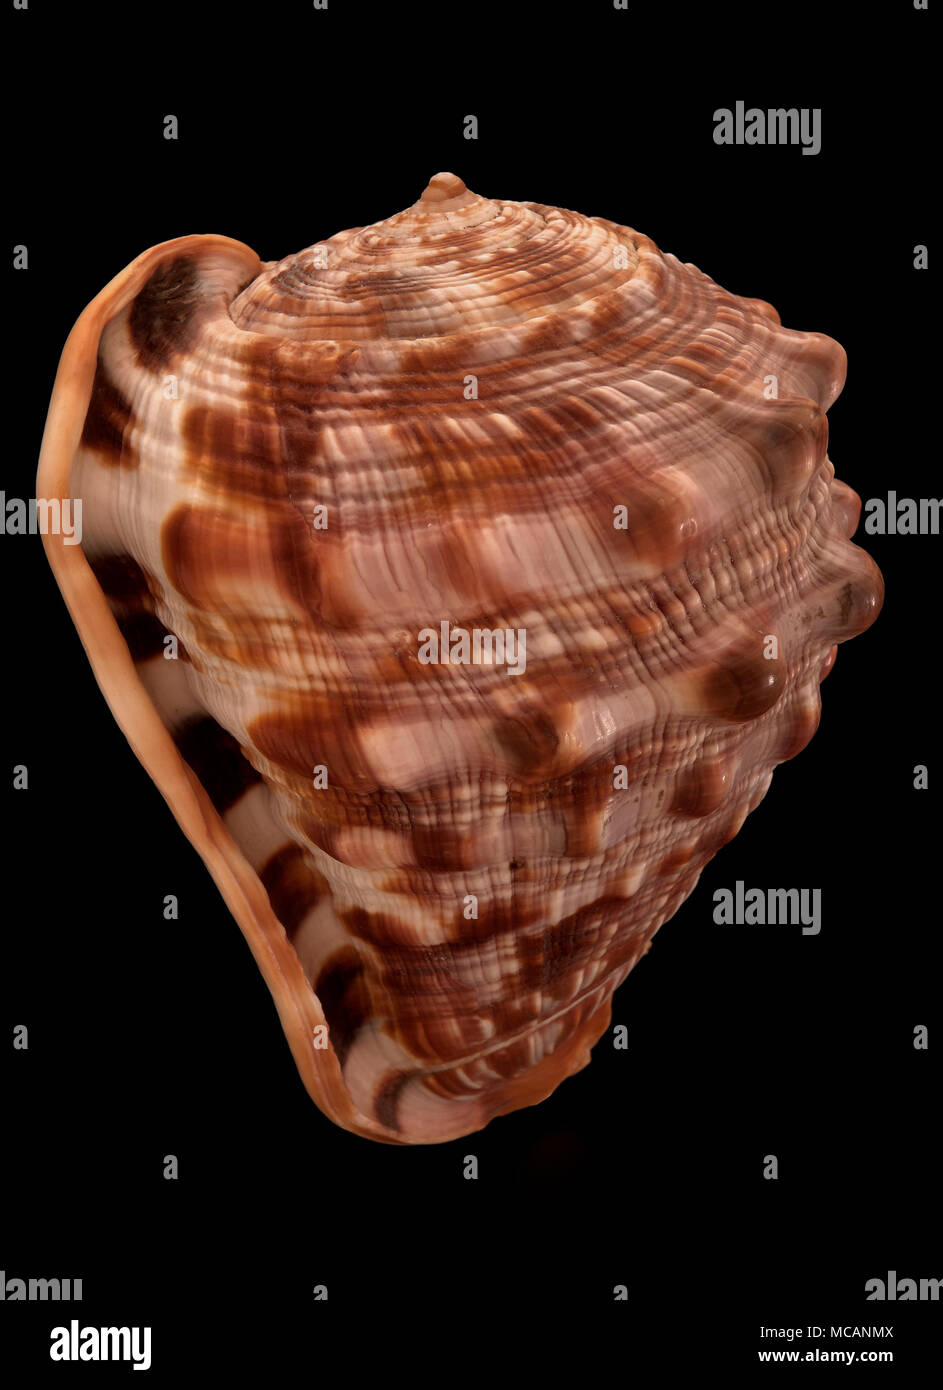 Seashell of Red helmet / Bullmouth (Cypraecassis rufa), Malacology collection, Spain, Europe Stock Photo